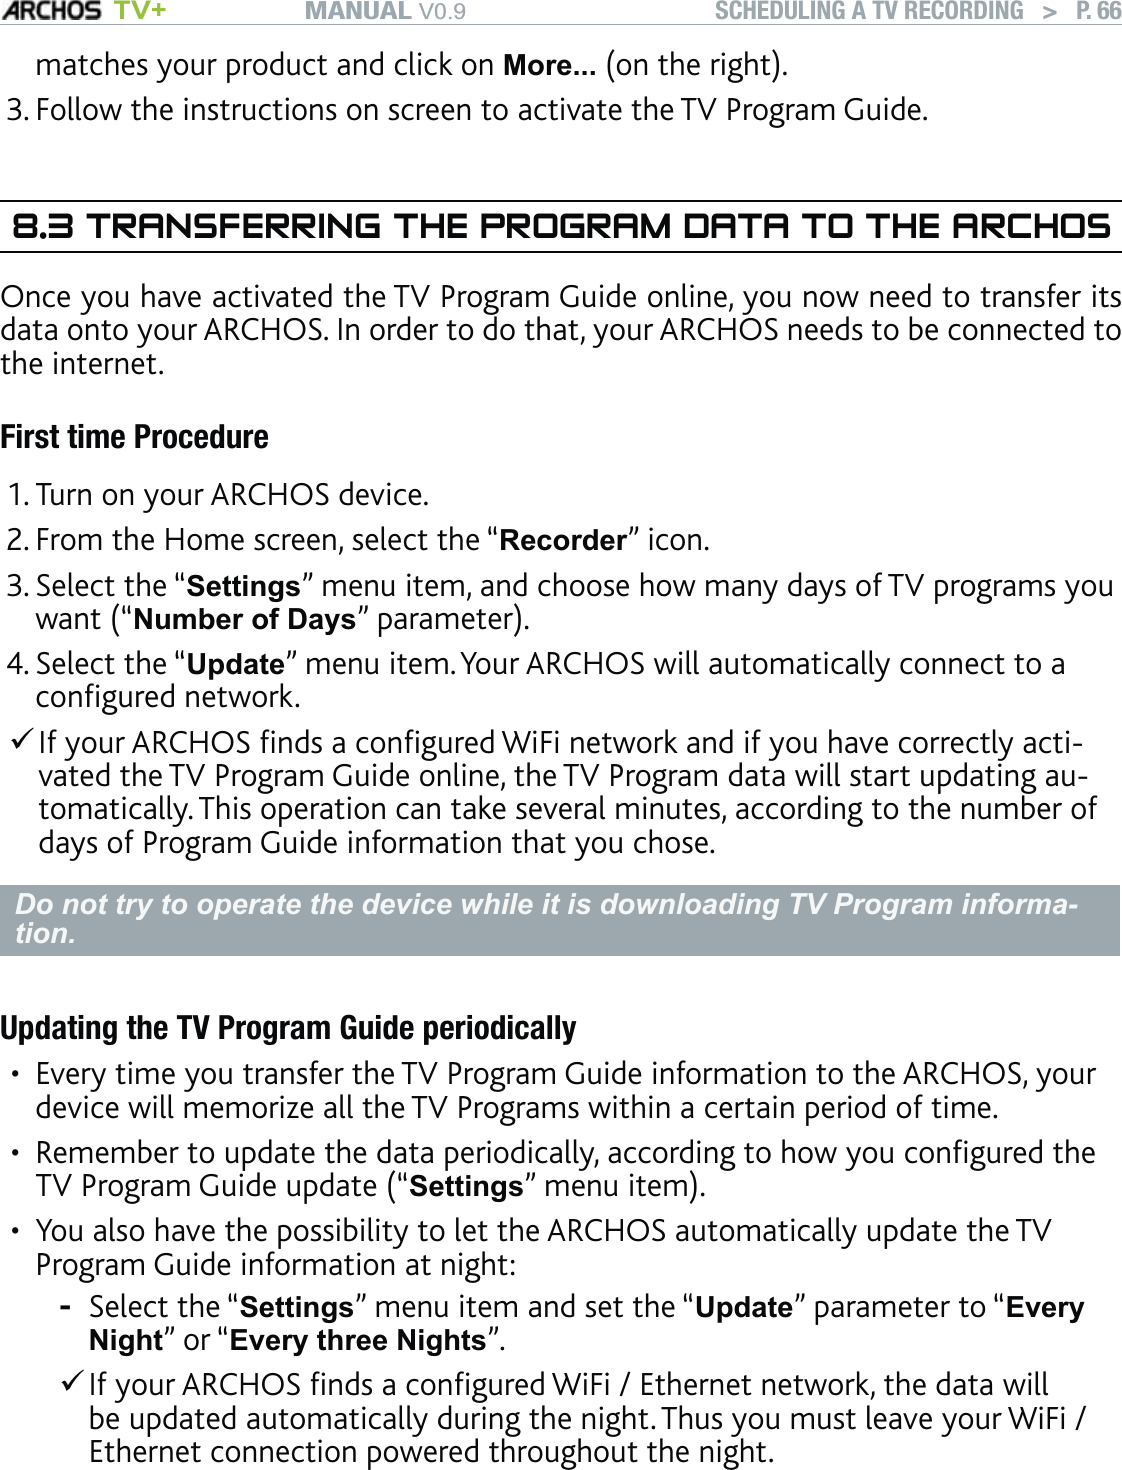 MANUAL V0.9 TV+ SCHEDULING A TV RECORDING   &gt;   P. 66matches your product and click on More... (on the right).Follow the instructions on screen to activate the TV Program Guide.8.3 TRANSFERRING THE PROGRAM DATA TO THE ARCHOSOnce you have activated the TV Program Guide online, you now need to transfer its data onto your ARCHOS. In order to do that, your ARCHOS needs to be connected to the internet.First time ProcedureTurn on your ARCHOS device.From the Home screen, select the “Recorder” icon.Select the “Settings” menu item, and choose how many days of TV programs you want (“Number of Days” parameter).Select the “Update” menu item. Your ARCHOS will automatically connect to a conﬁgured network. If your ARCHOS ﬁnds a conﬁgured WiFi network and if you have correctly acti-vated the TV Program Guide online, the TV Program data will start updating au-tomatically. This operation can take several minutes, according to the number of days of Program Guide information that you chose.Do not try to operate the device while it is downloading TV Program informa-tion.Updating the TV Program Guide periodicallyEvery time you transfer the TV Program Guide information to the ARCHOS, your device will memorize all the TV Programs within a certain period of time. Remember to update the data periodically, according to how you conﬁgured the TV Program Guide update (“Settings” menu item).You also have the possibility to let the ARCHOS automatically update the TV Program Guide information at night: Select the “Settings” menu item and set the “Update” parameter to “Every Night” or “Every three Nights”. If your ARCHOS ﬁnds a conﬁgured WiFi / Ethernet network, the data will be updated automatically during the night. Thus you must leave your WiFi / Ethernet connection powered throughout the night.3.1.2.3.4.•••-